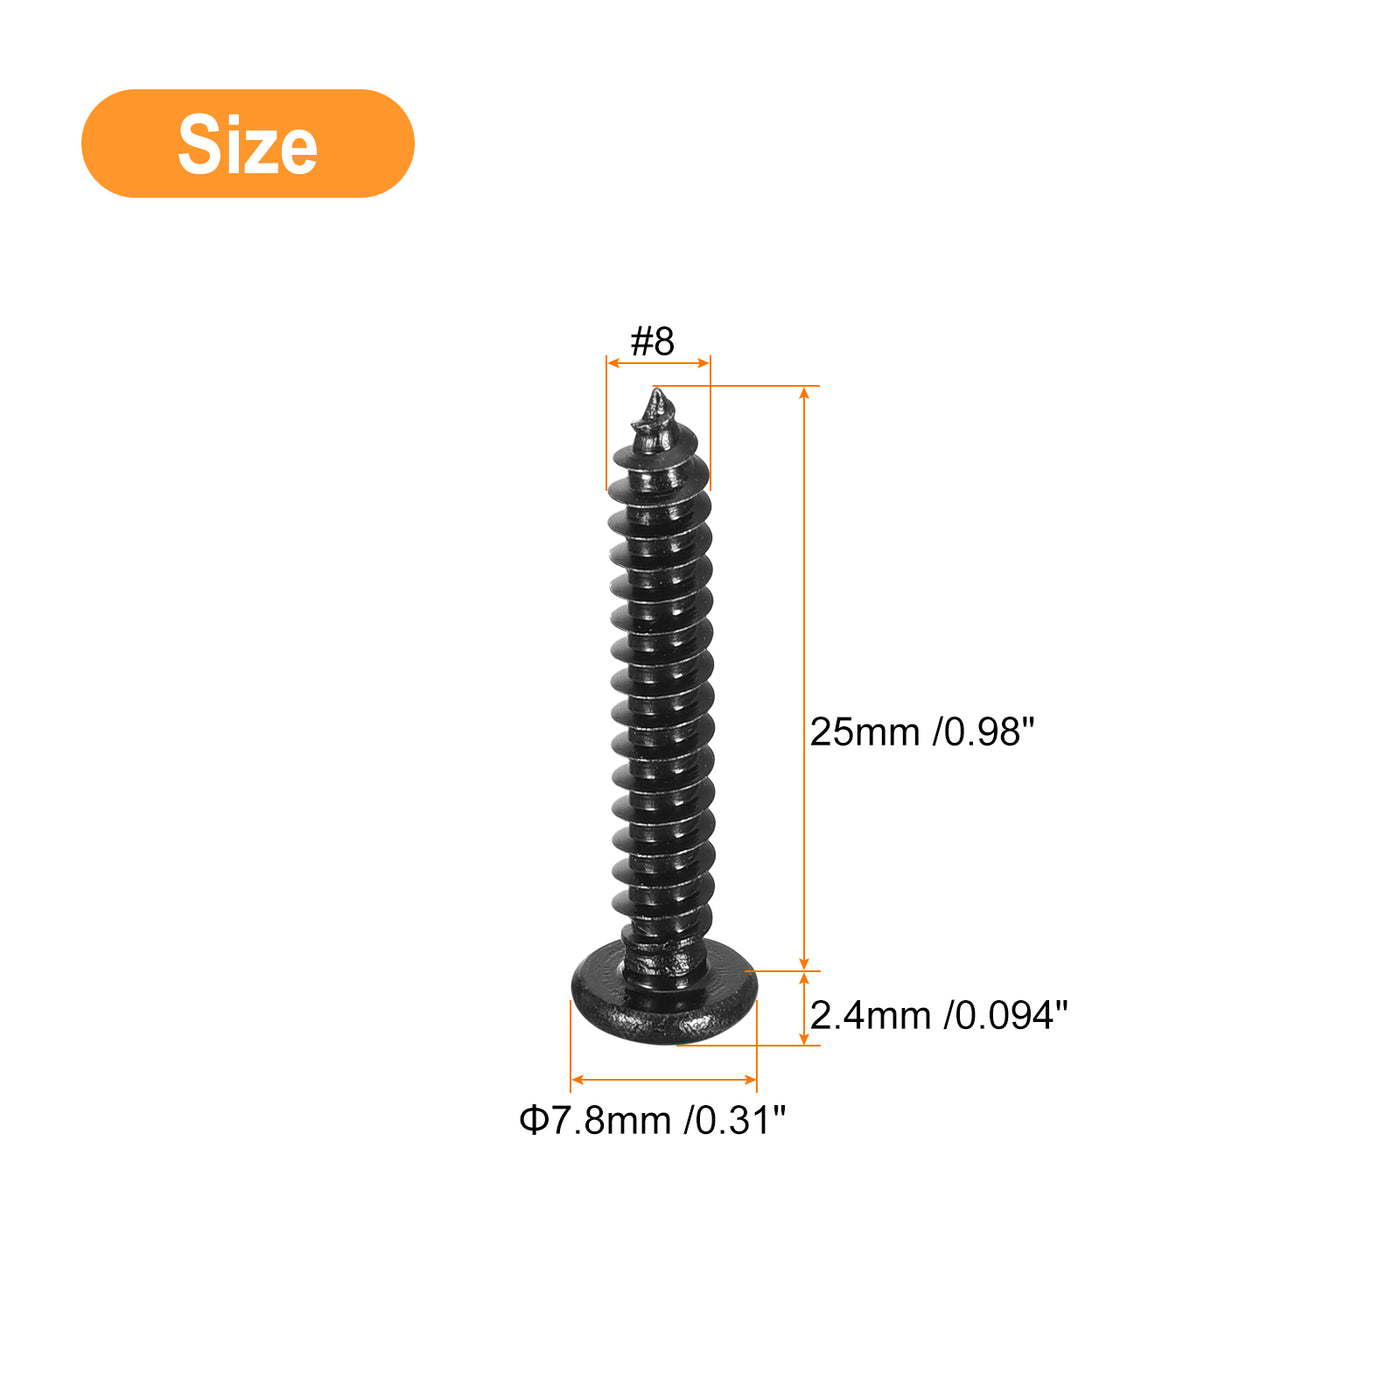 uxcell Uxcell #8 x 1" Phillips Pan Head Self-tapping Screw, 100pcs - 304 Stainless Steel Round Head Wood Screw Full Thread (Black)